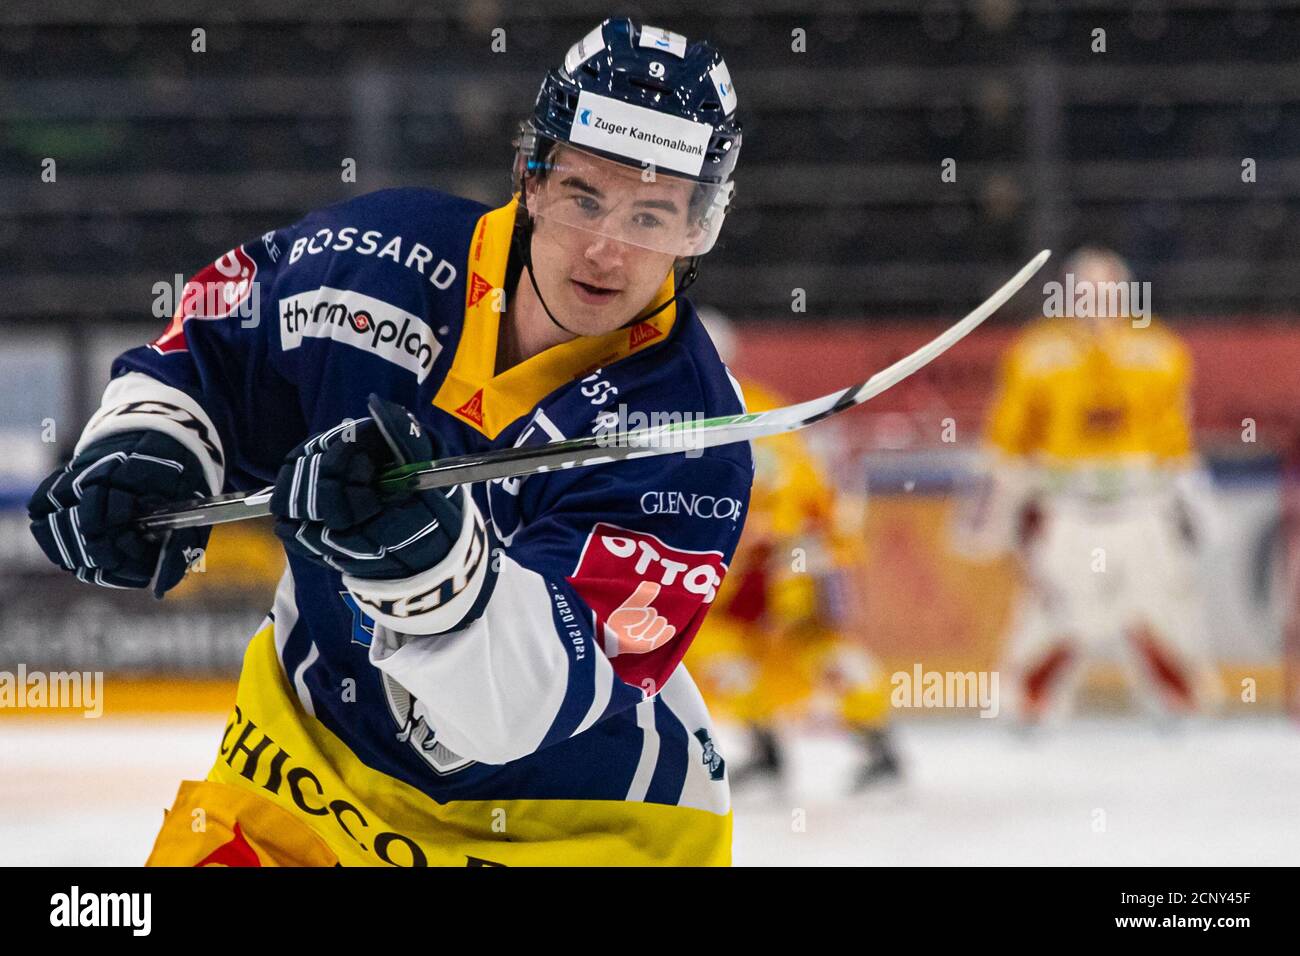 during the National League preparation ice hockey game between EV Zug and EHC Biel-Bienne on September 18, 2020 in the Bossard Arena in Zug